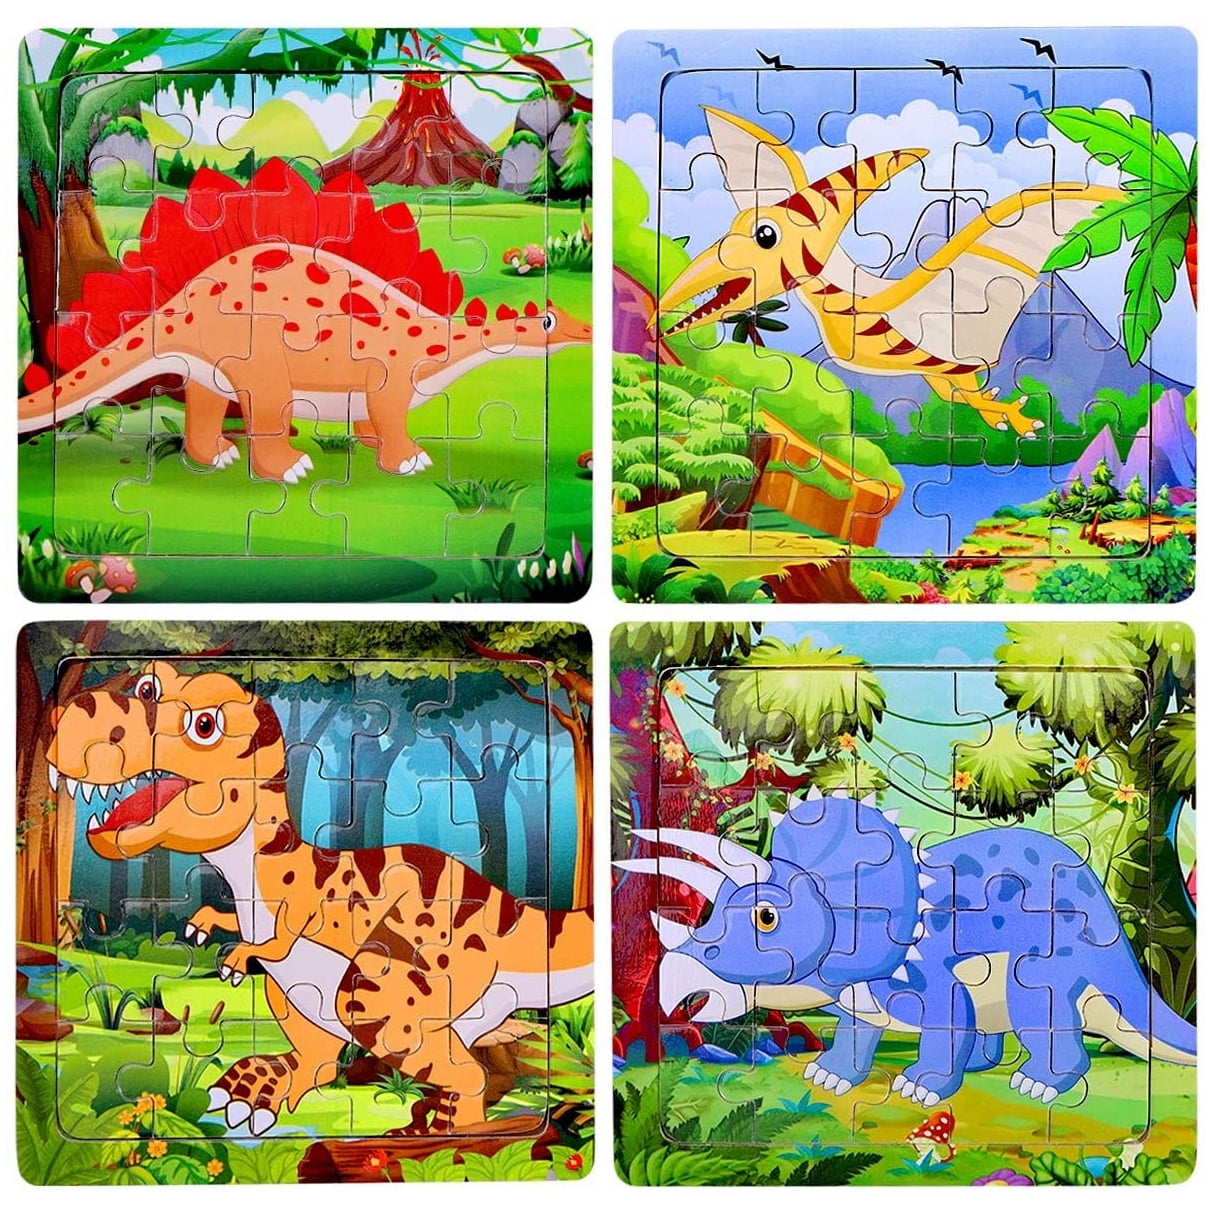 Dinosaur 7 Educational Puzzle Family Game Gift for Adults and Kids 500/1000/1500/2000/3000/4000/5000/6000 Puzzles Puzzle for Funny Family Games Pieces Fit Together Perfectly Large Wooden Jigsaw